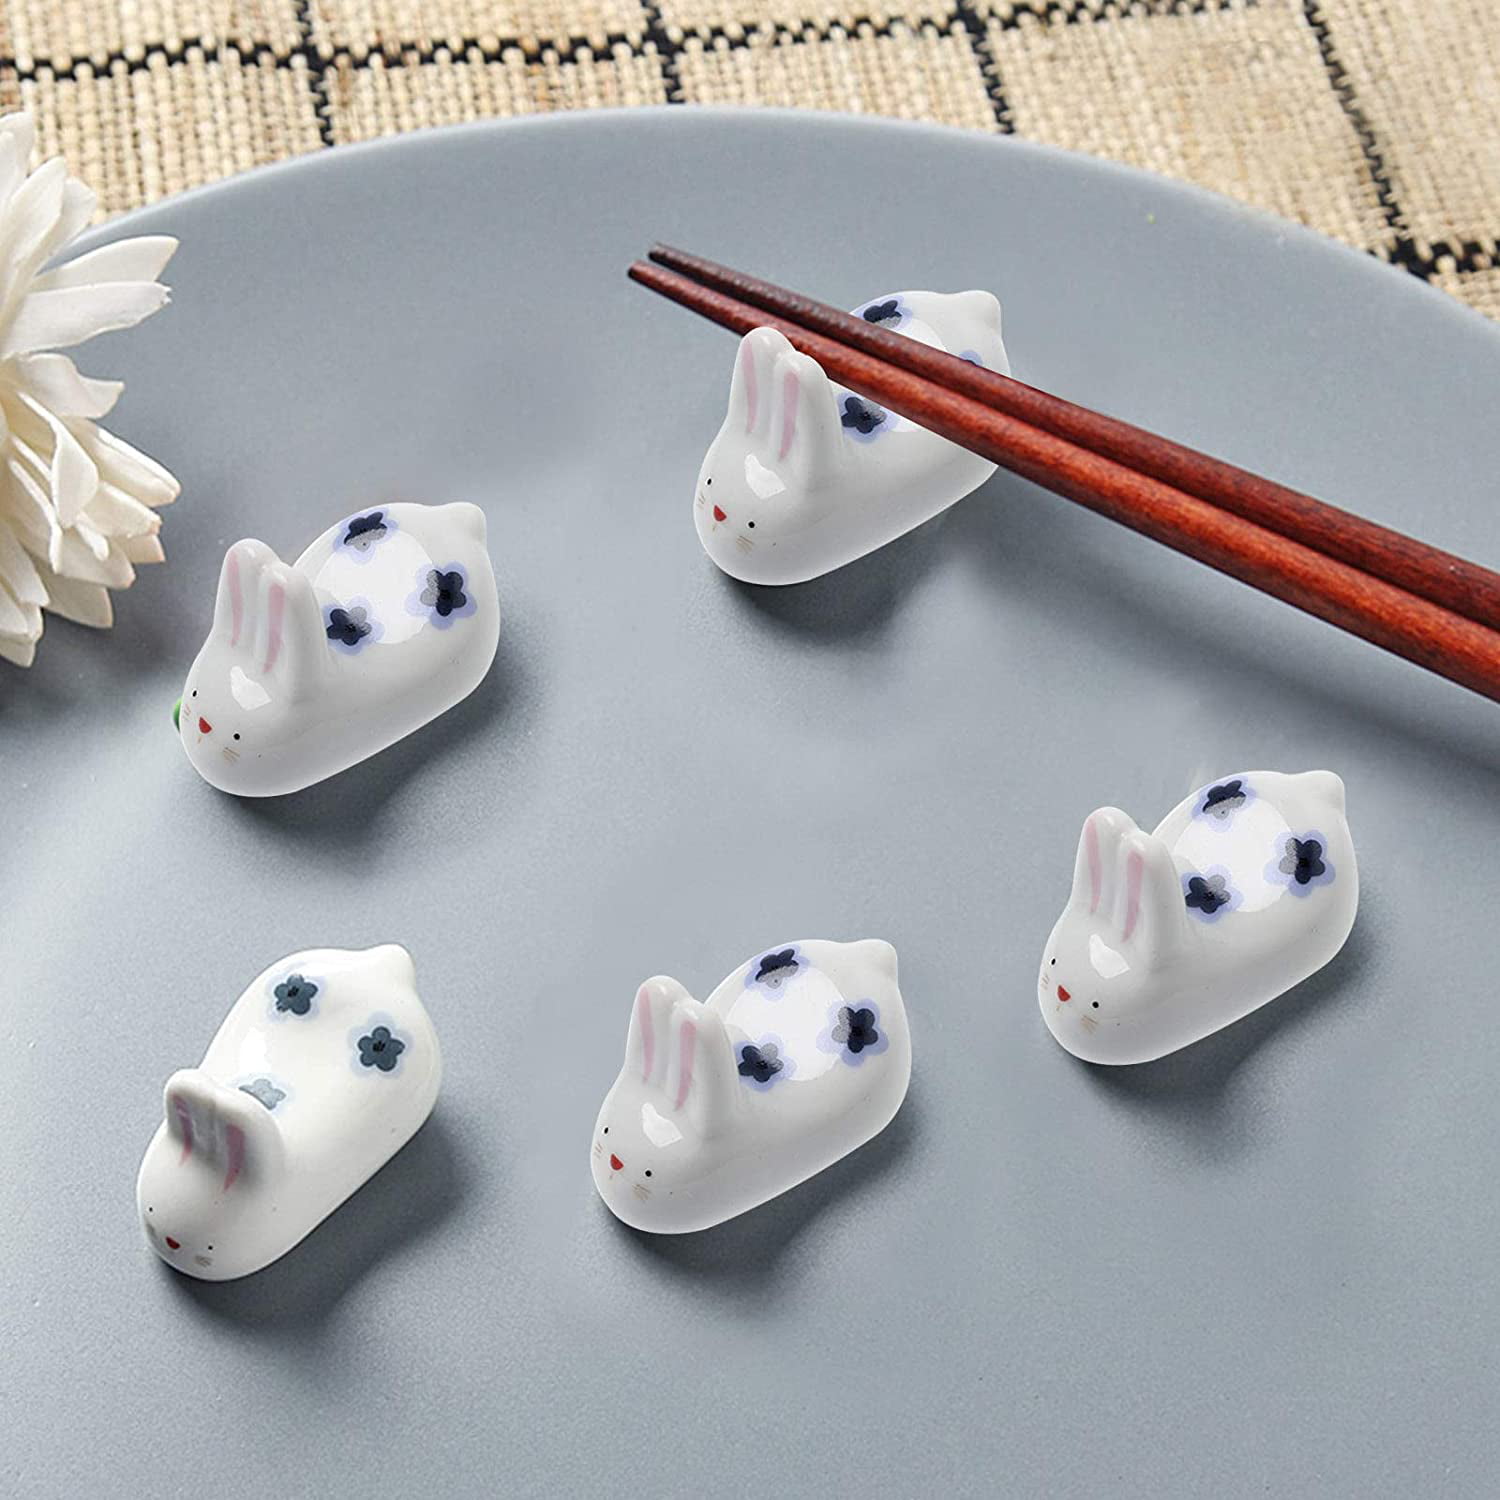 4 x Spoon and Chopsticks Holder Ceramic White Porcelain Chopstick and Spoon Rest 